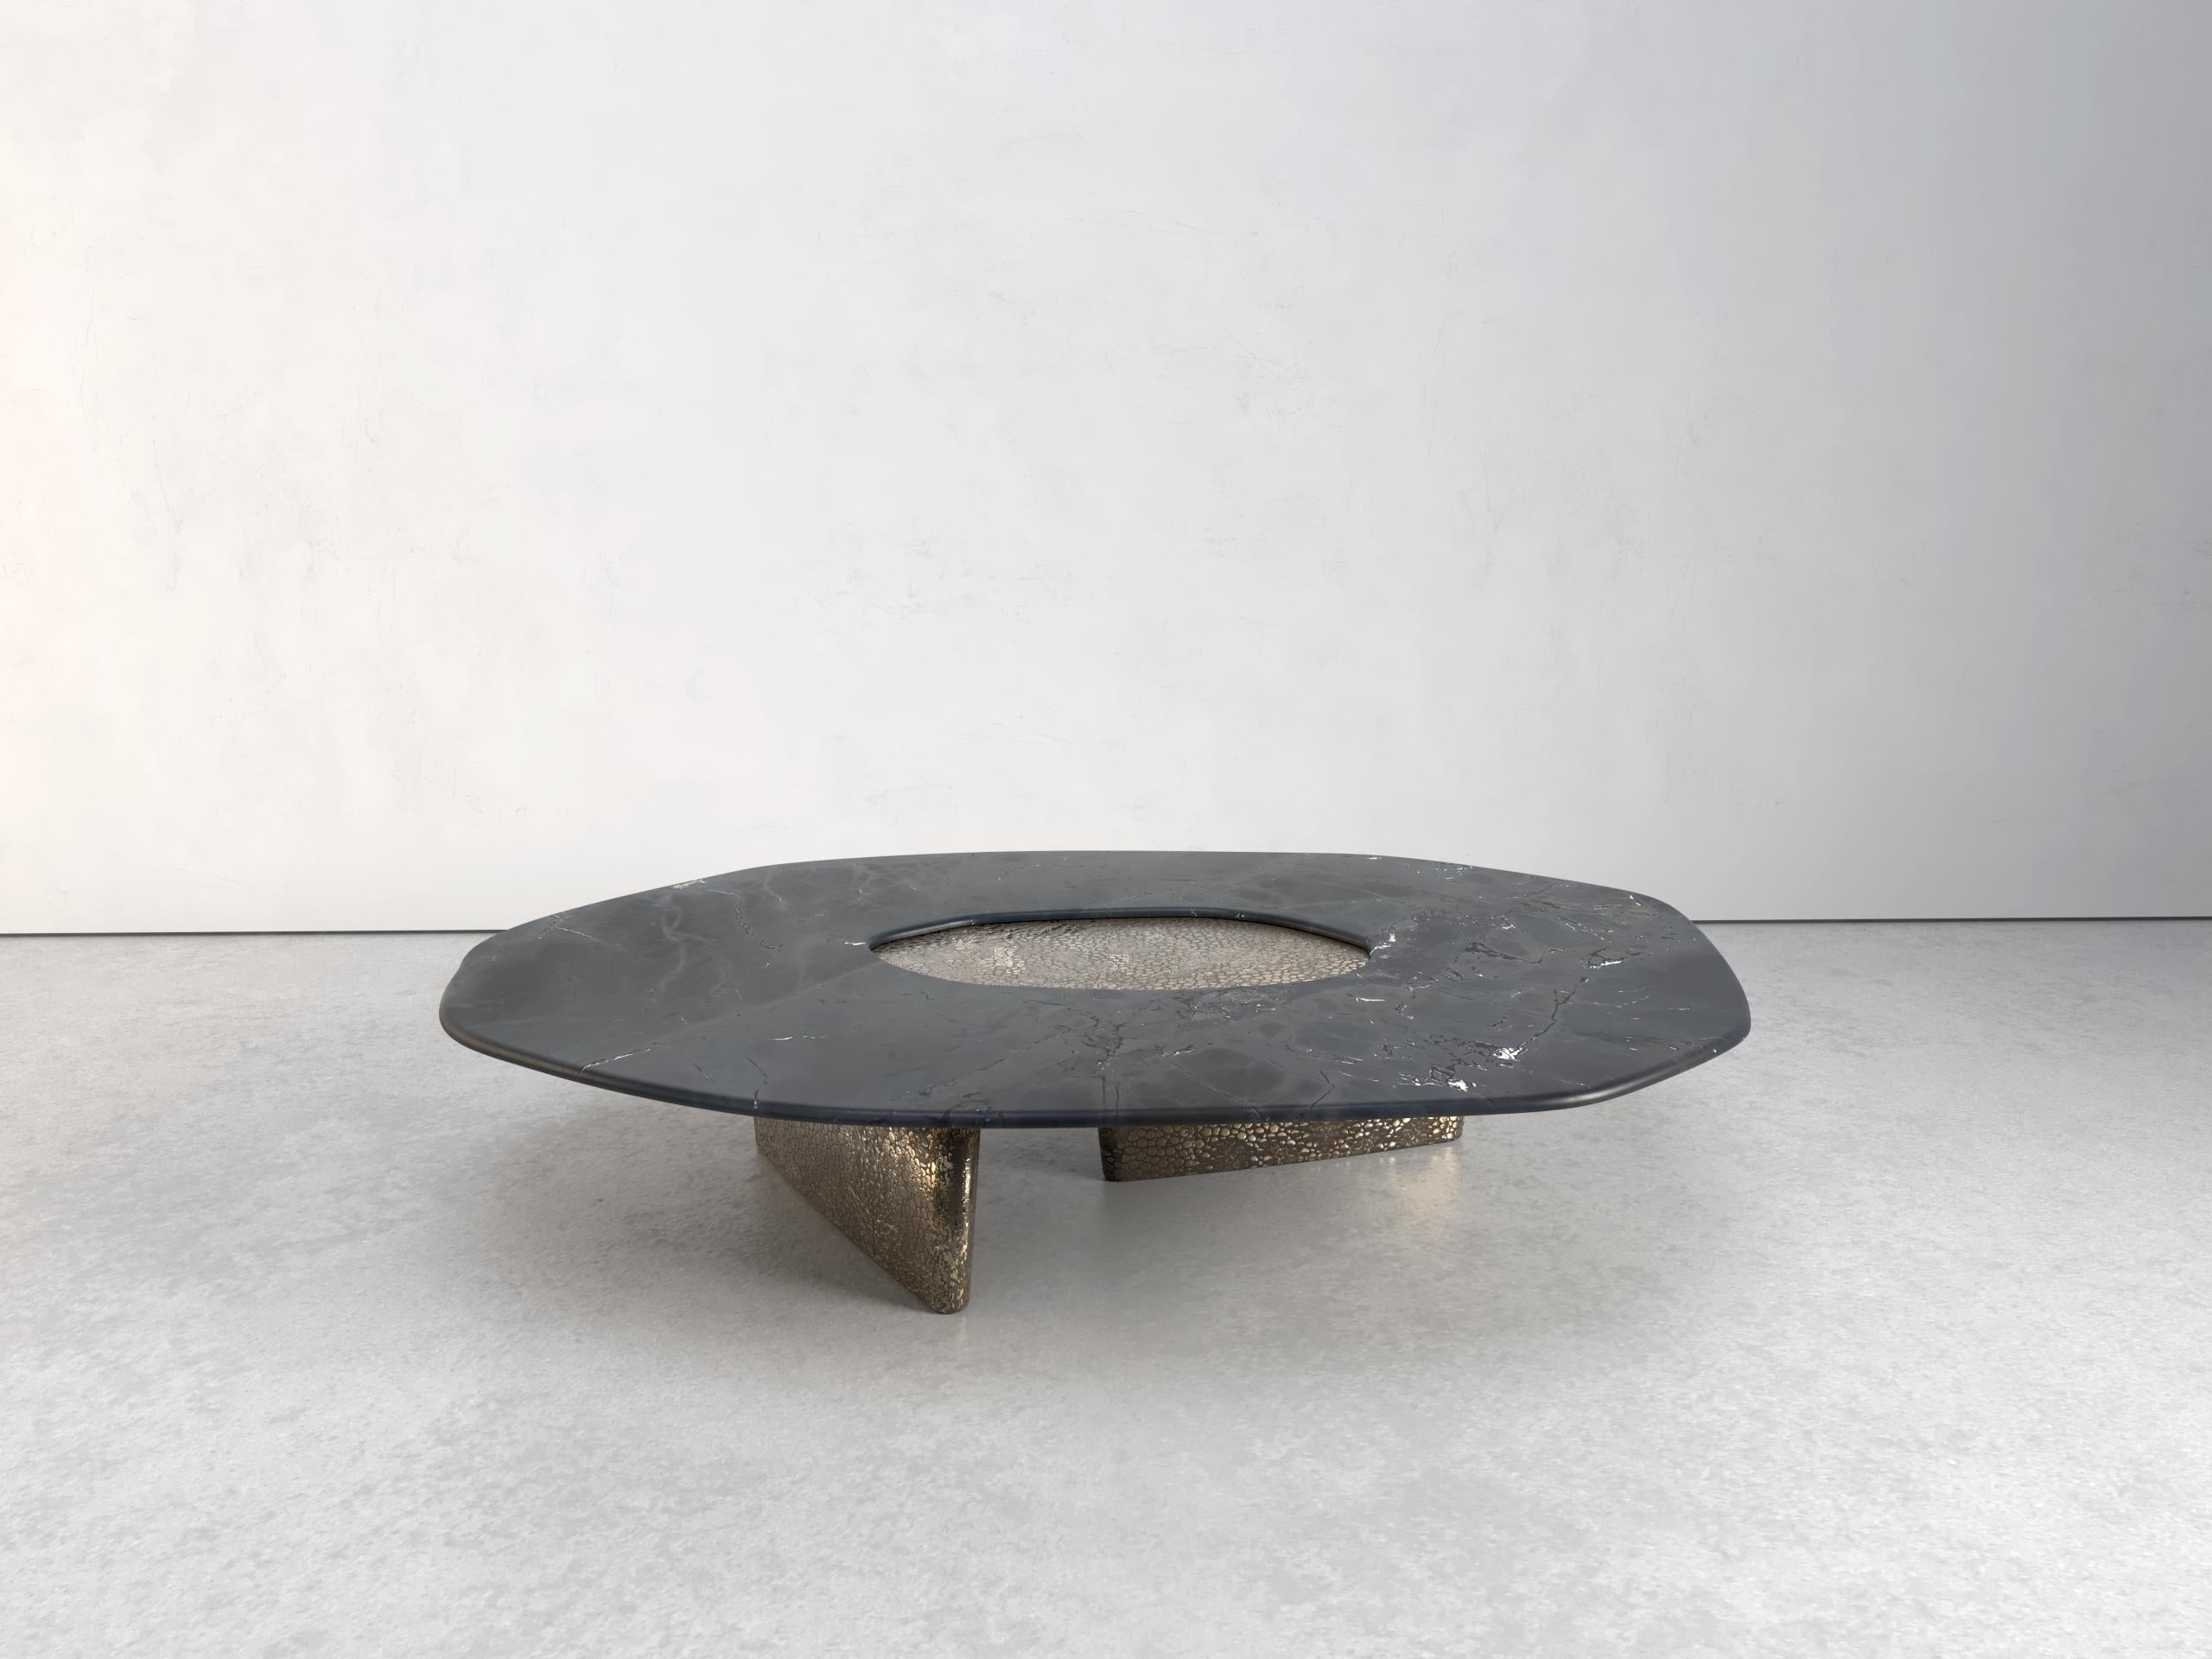 Contemporary The Elements V Coffee Table, 1 of 1 by Grzegorz Majka For Sale